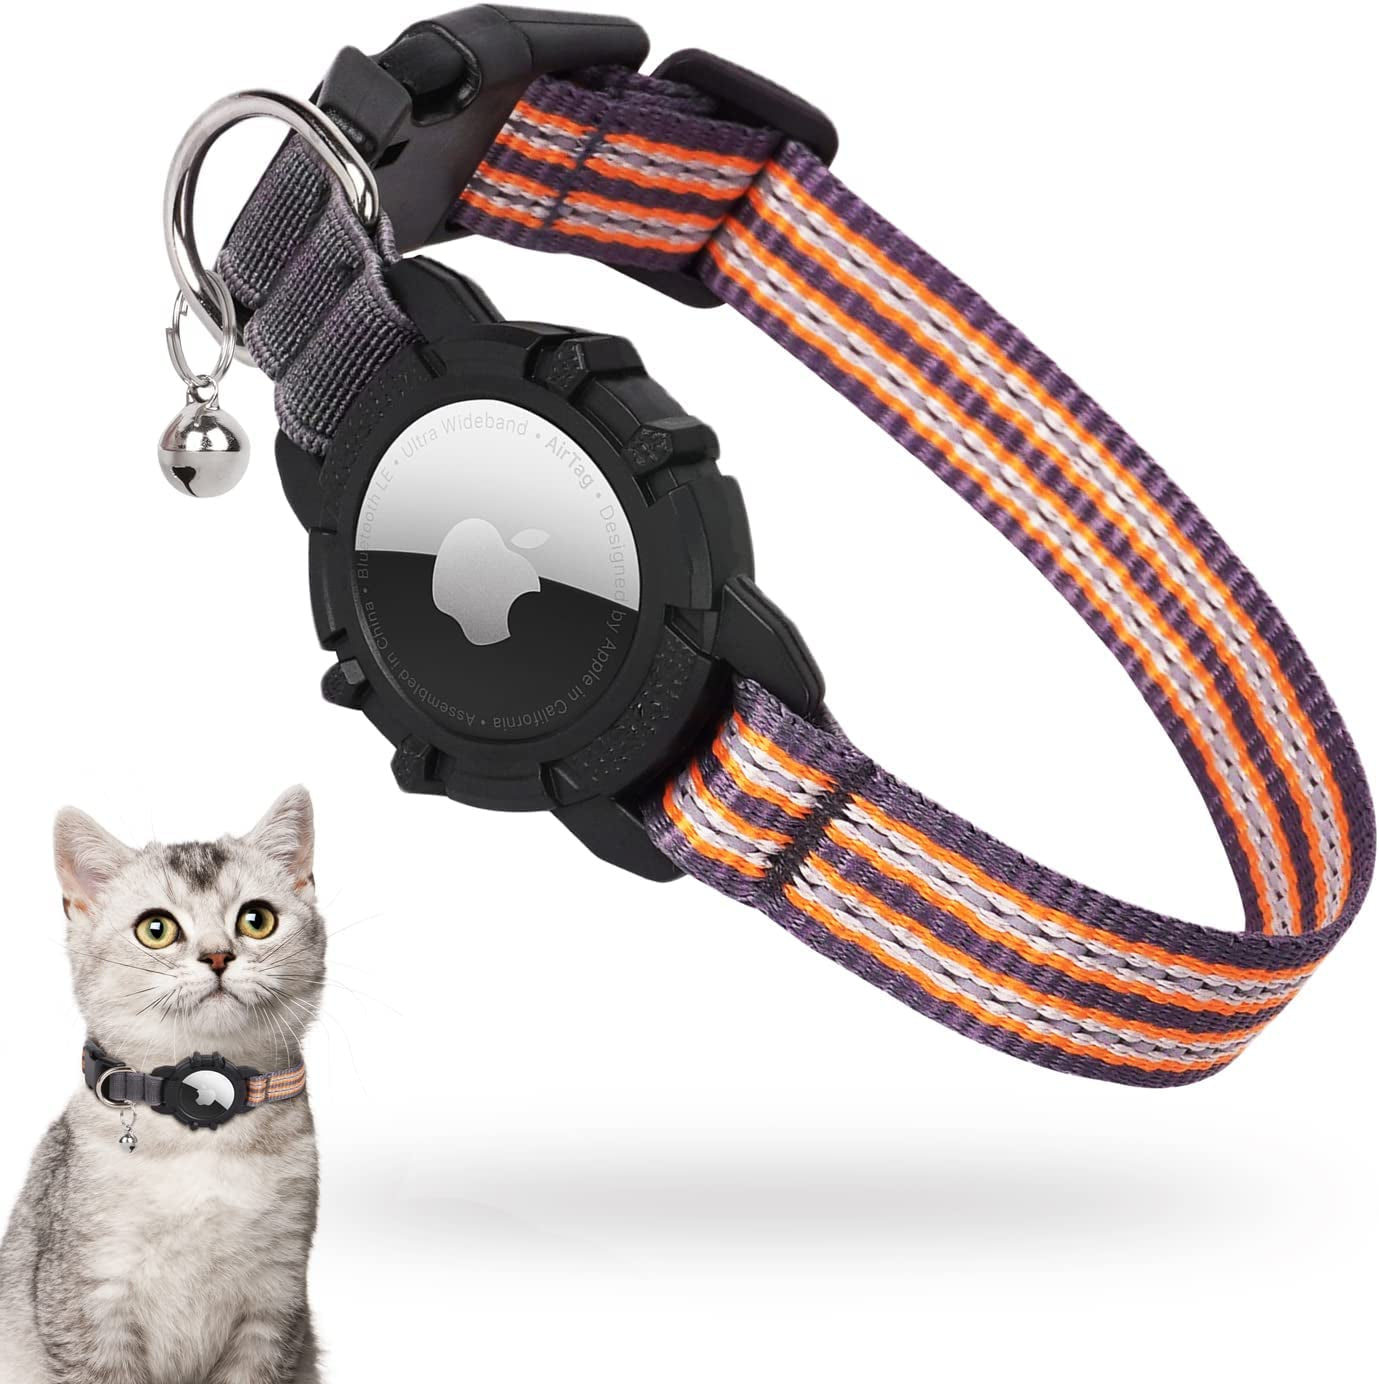 Airtag Cat Collar, FEEYAR Integrated Apple Air Tag Cat Collar, Reflective GPS Cat Collar with Airtag Holder and Bell [Black], Lightweight Tracker Cat Collars for Girl Boy Cats, Kittens and Puppies